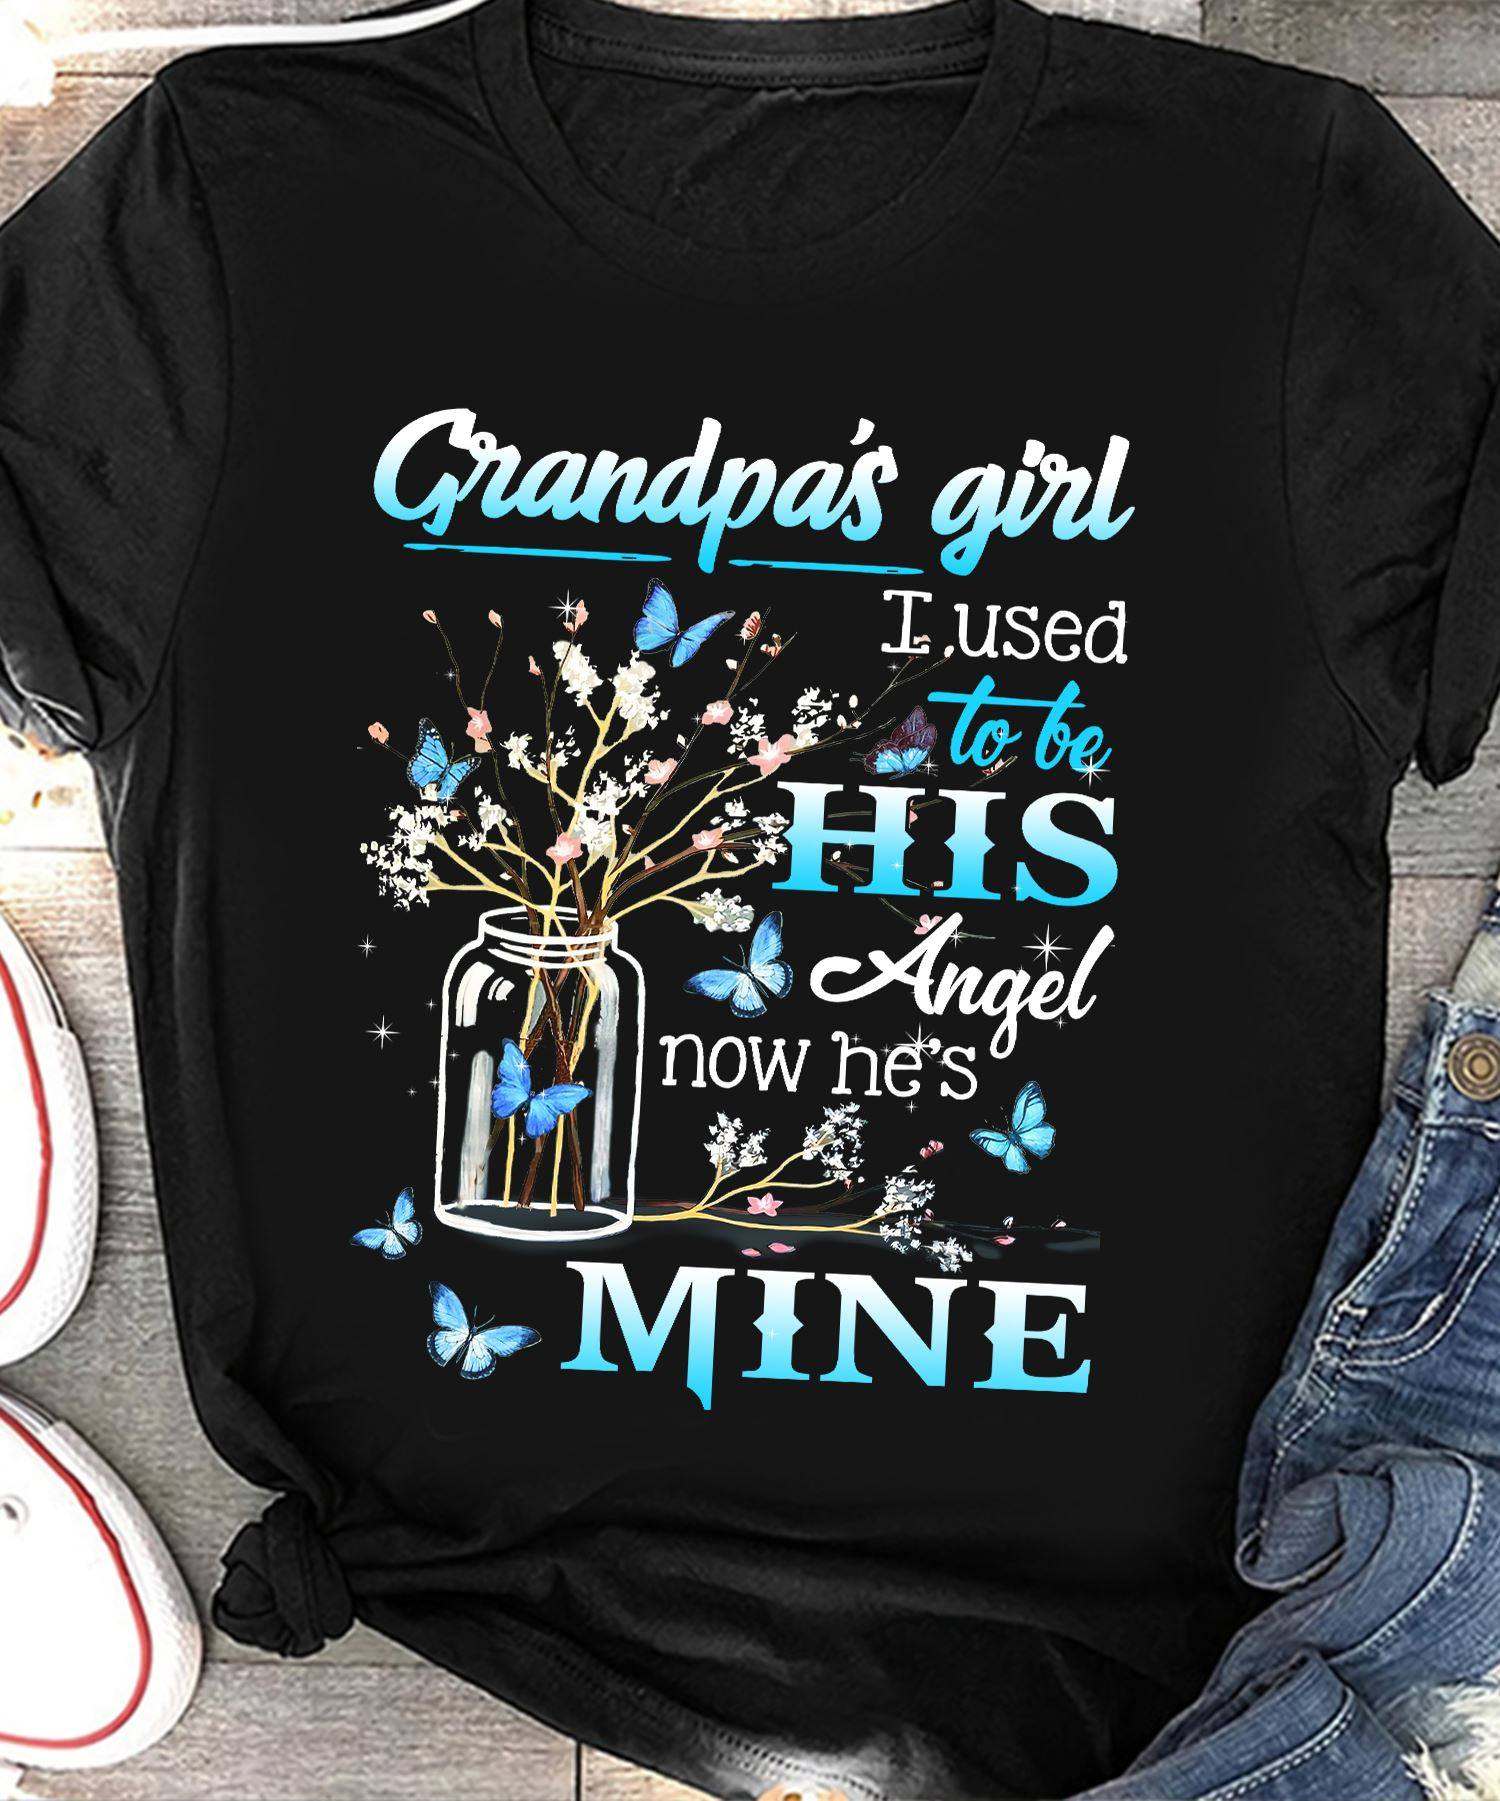 Grandpa's girl I used to be his angel now he's mine - Granddaughter and grandpa